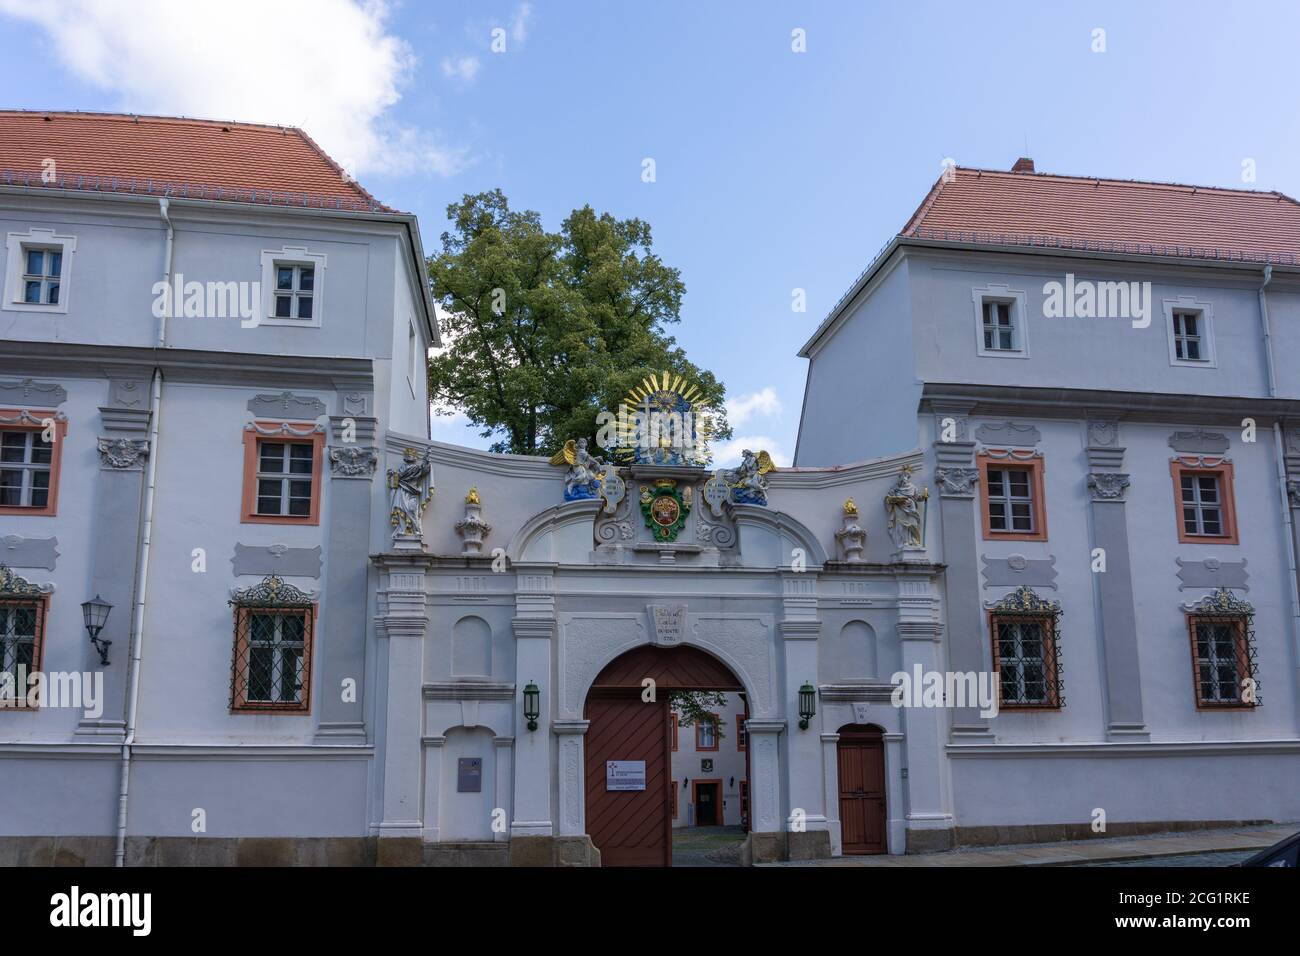 Bautzen, Saxony / Germany - 7 September 2020: view of the historic catehdral chapter building in Bautzen Stock Photo